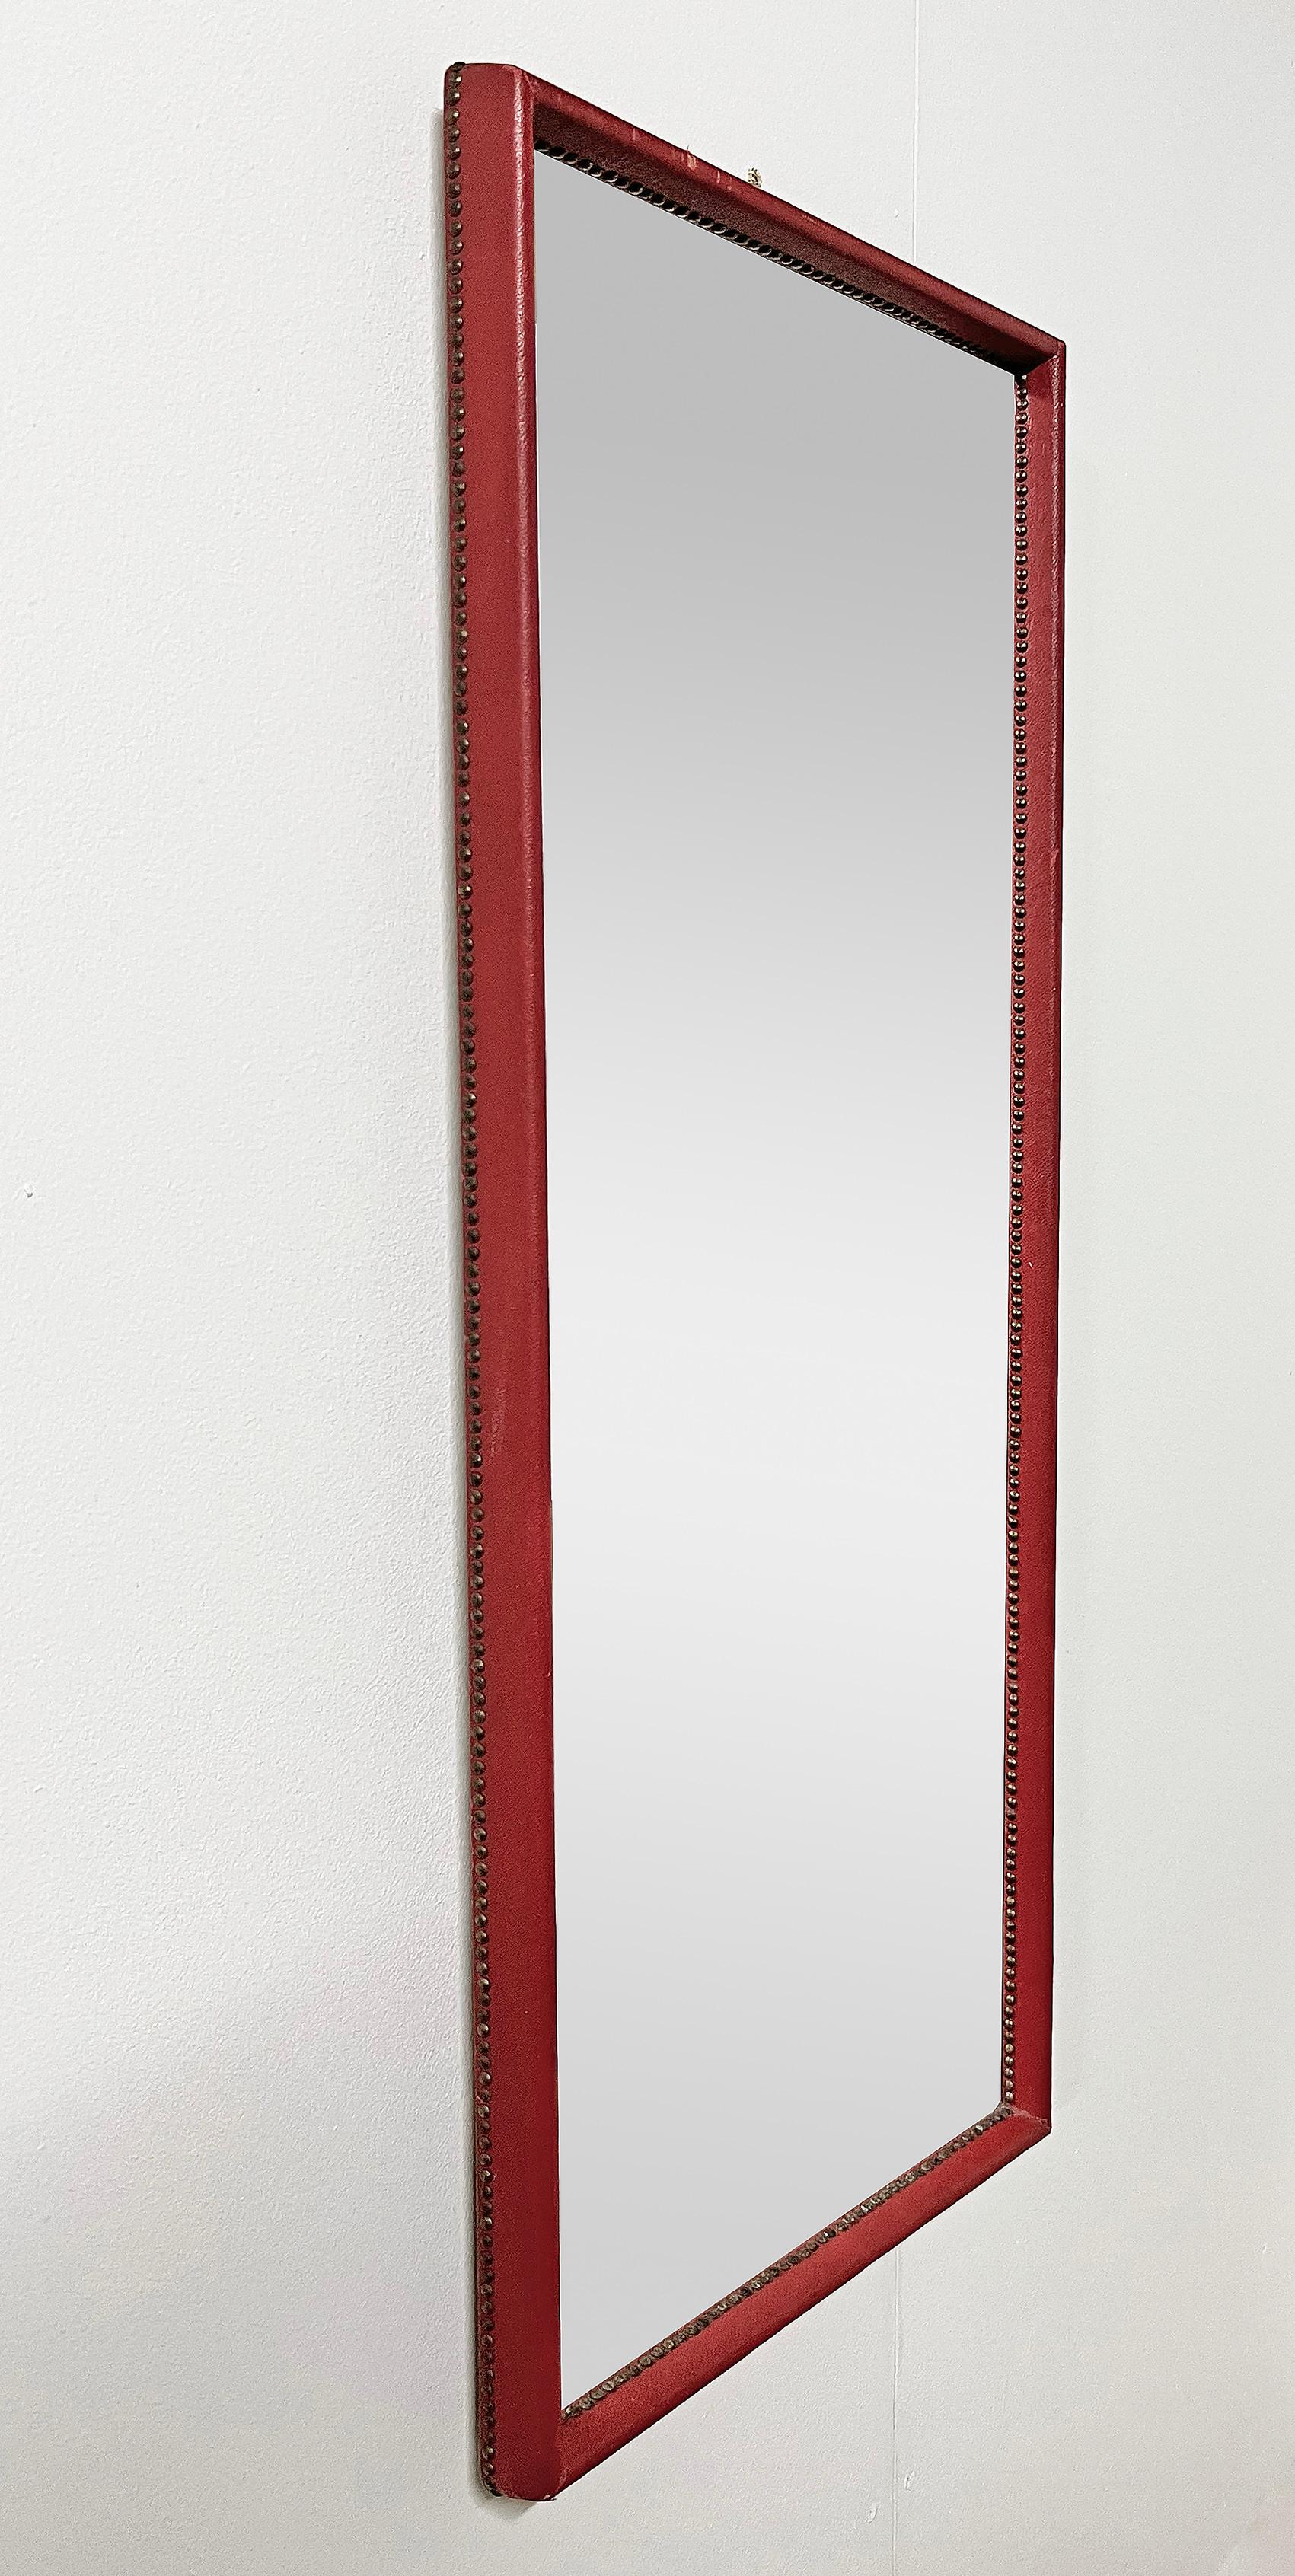 Wall mirror attributed to Otto Schulz, 1940's. Frame dressed in dark red faux leather, decorated around the inner and outer edges with brass nails.
Wear and patina consistent with age and use. 
Leather damage and leather wear and patina as seen on